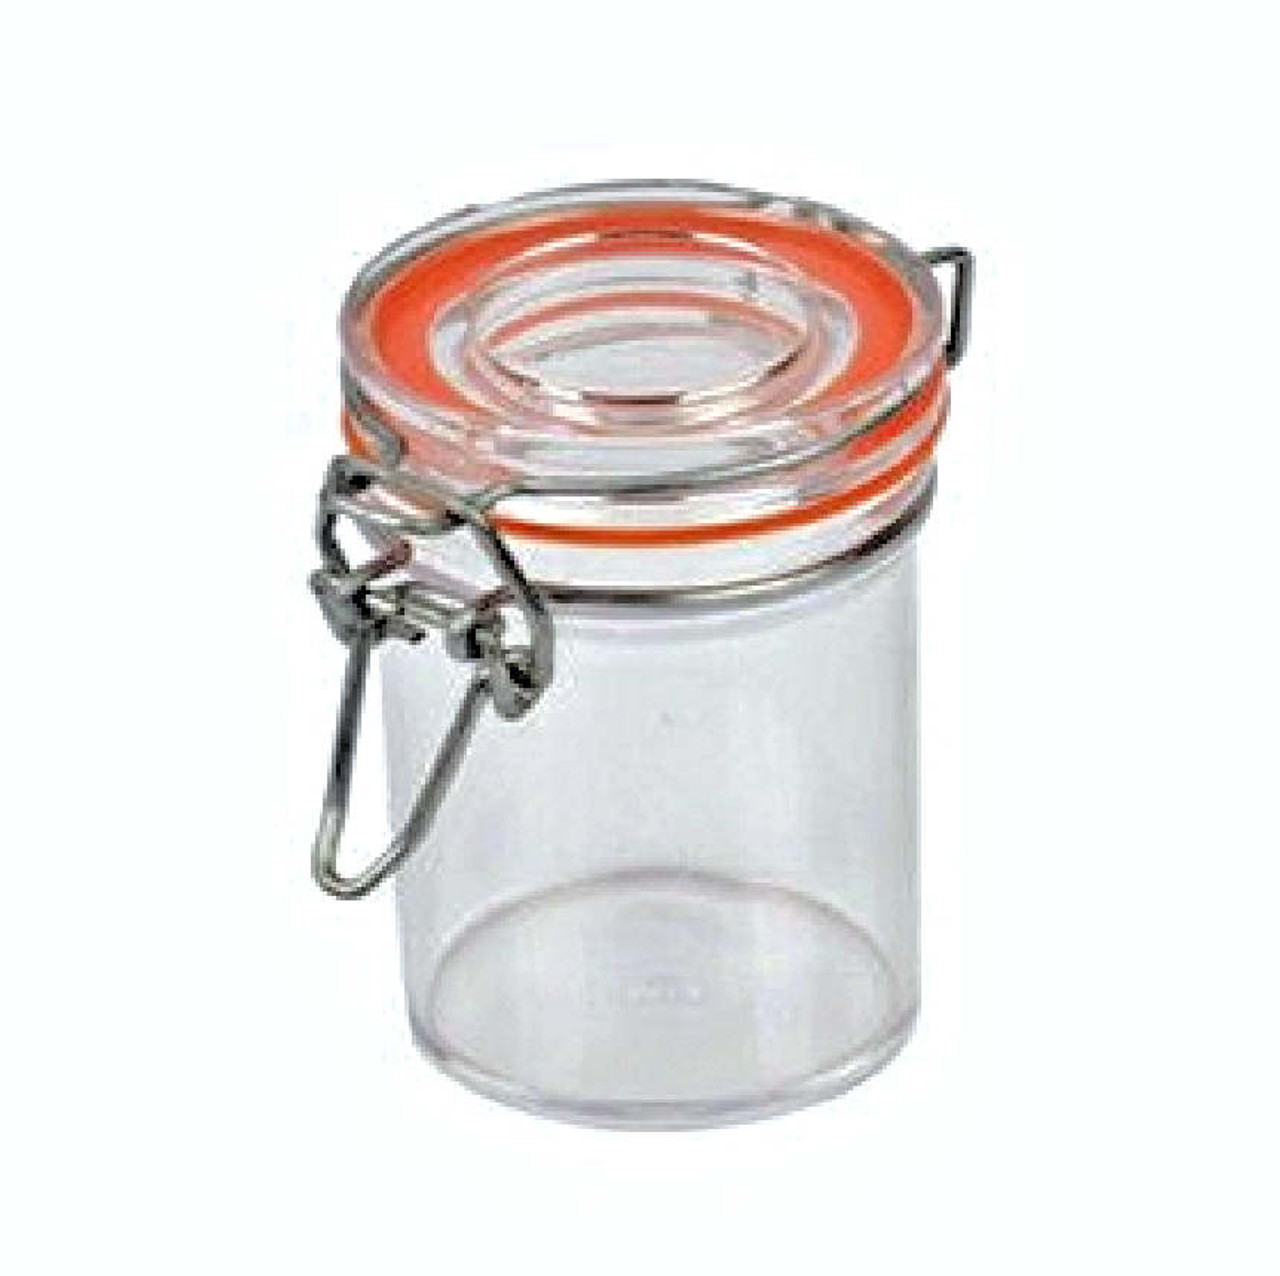 6 Mini square seasoning vat with lid and container - Dishies - net